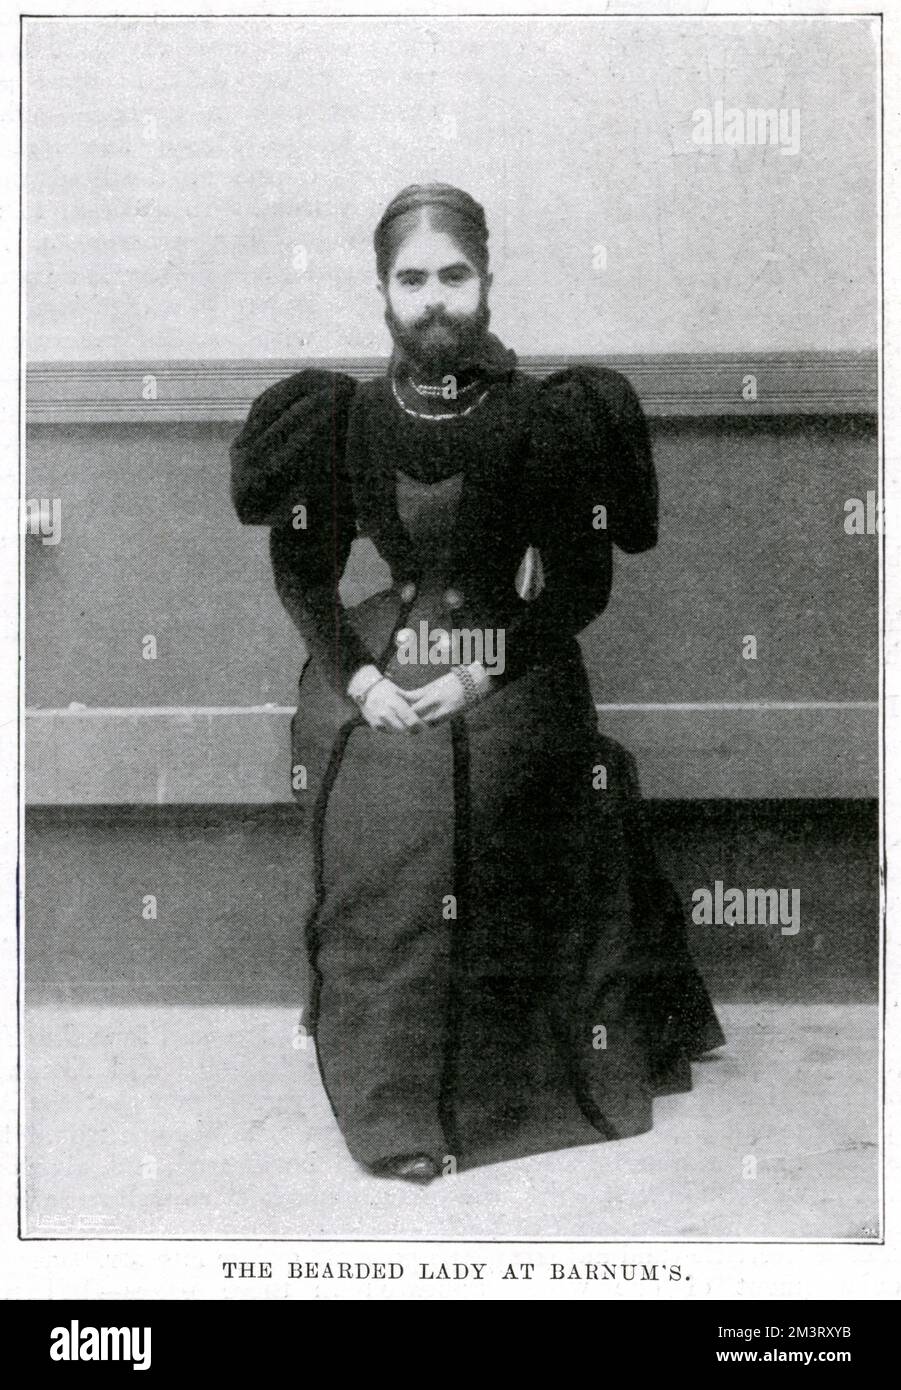 Annie Jones Elliot (1865 - 1902) also known as 'the Bearded Lady' toured with the showman P. T. Barnum as a circus attraction.     Date: 1898 Stock Photo